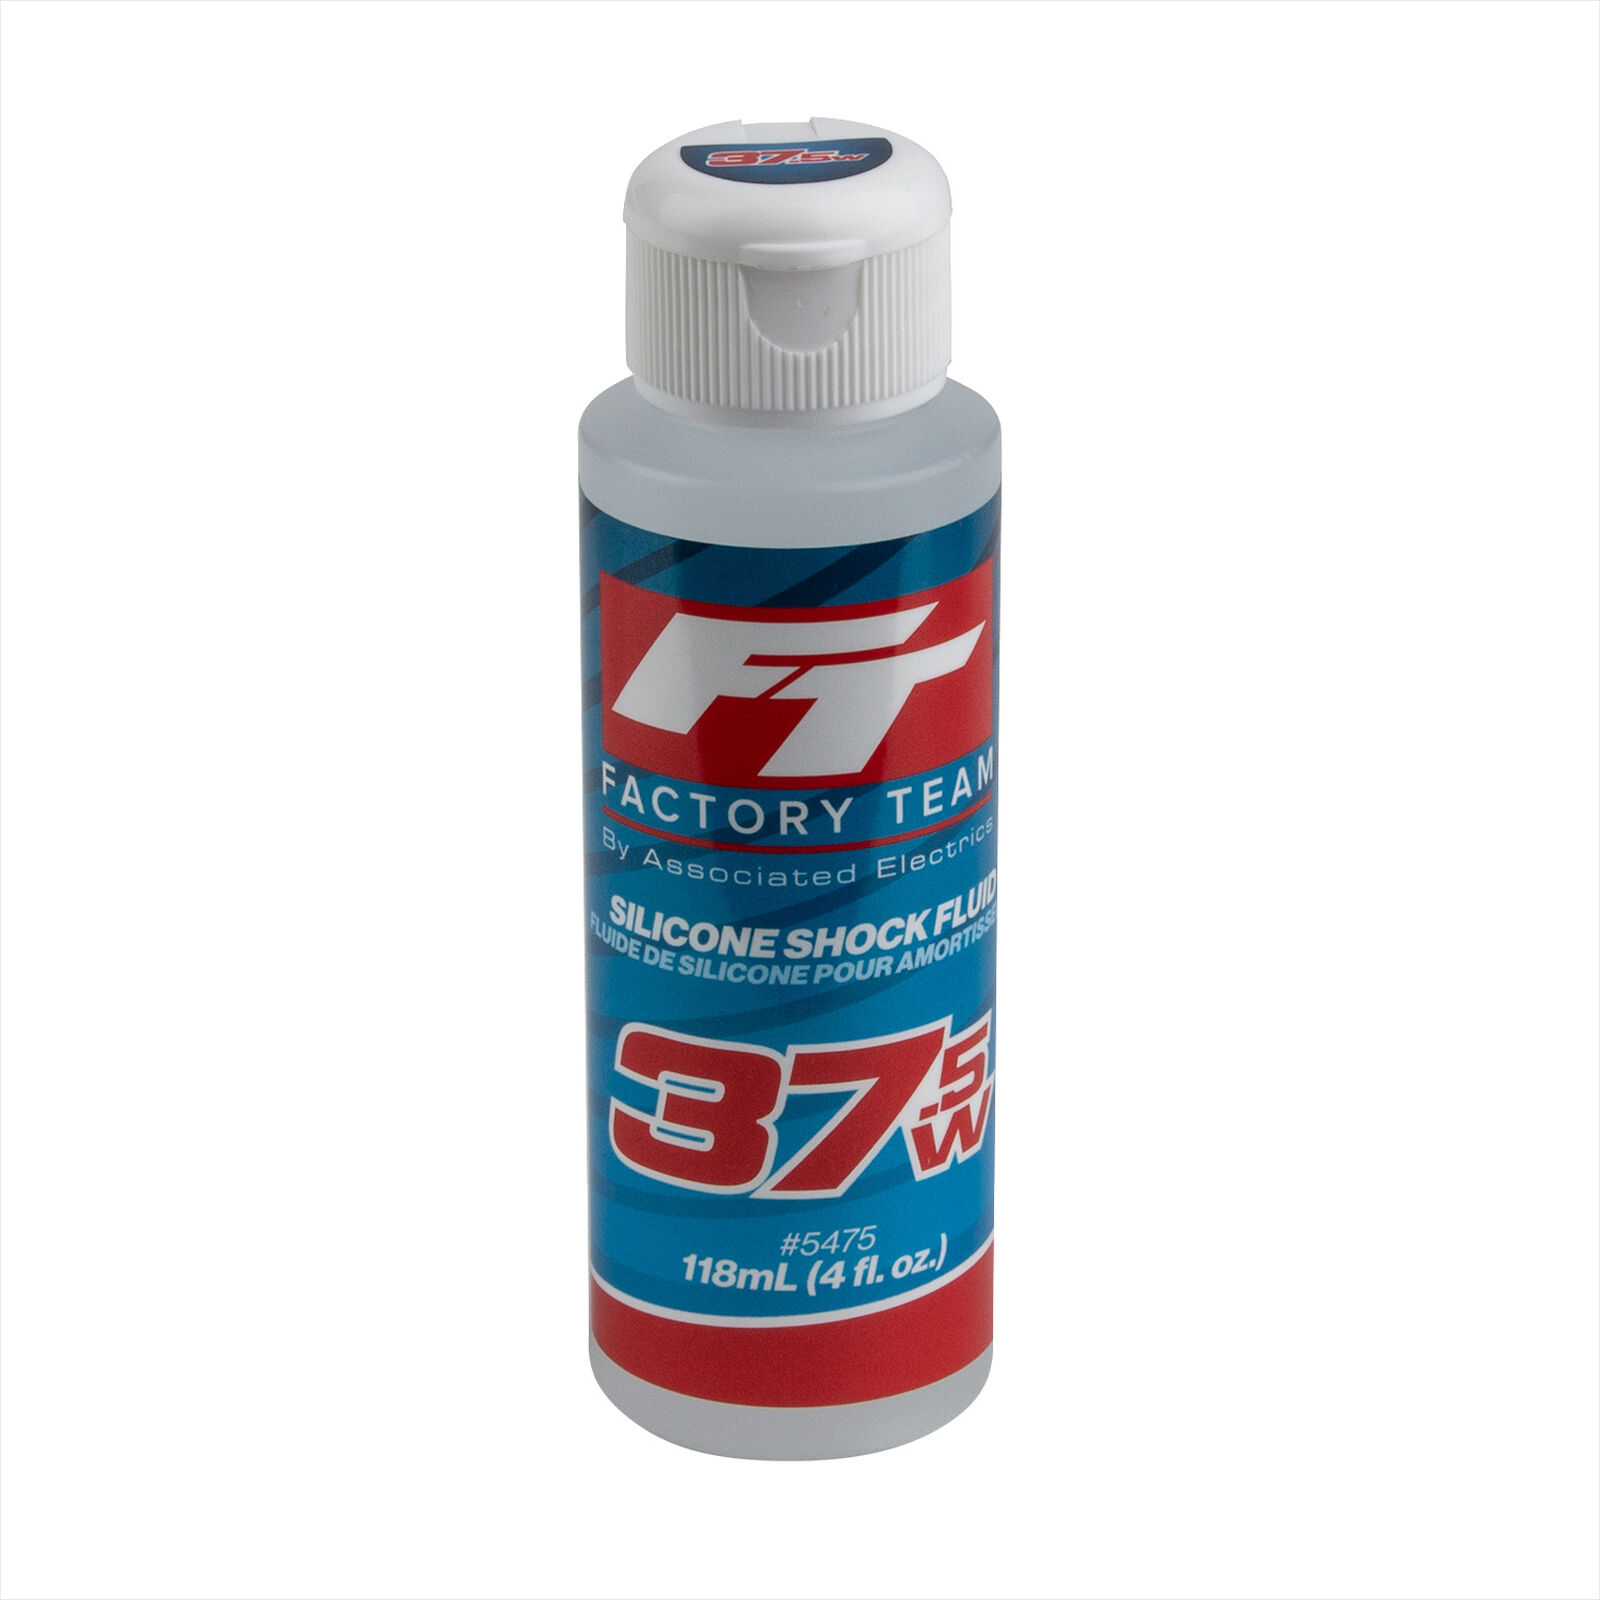 FT Silicone Shock Fluid, 37.5wt (463 cSt)